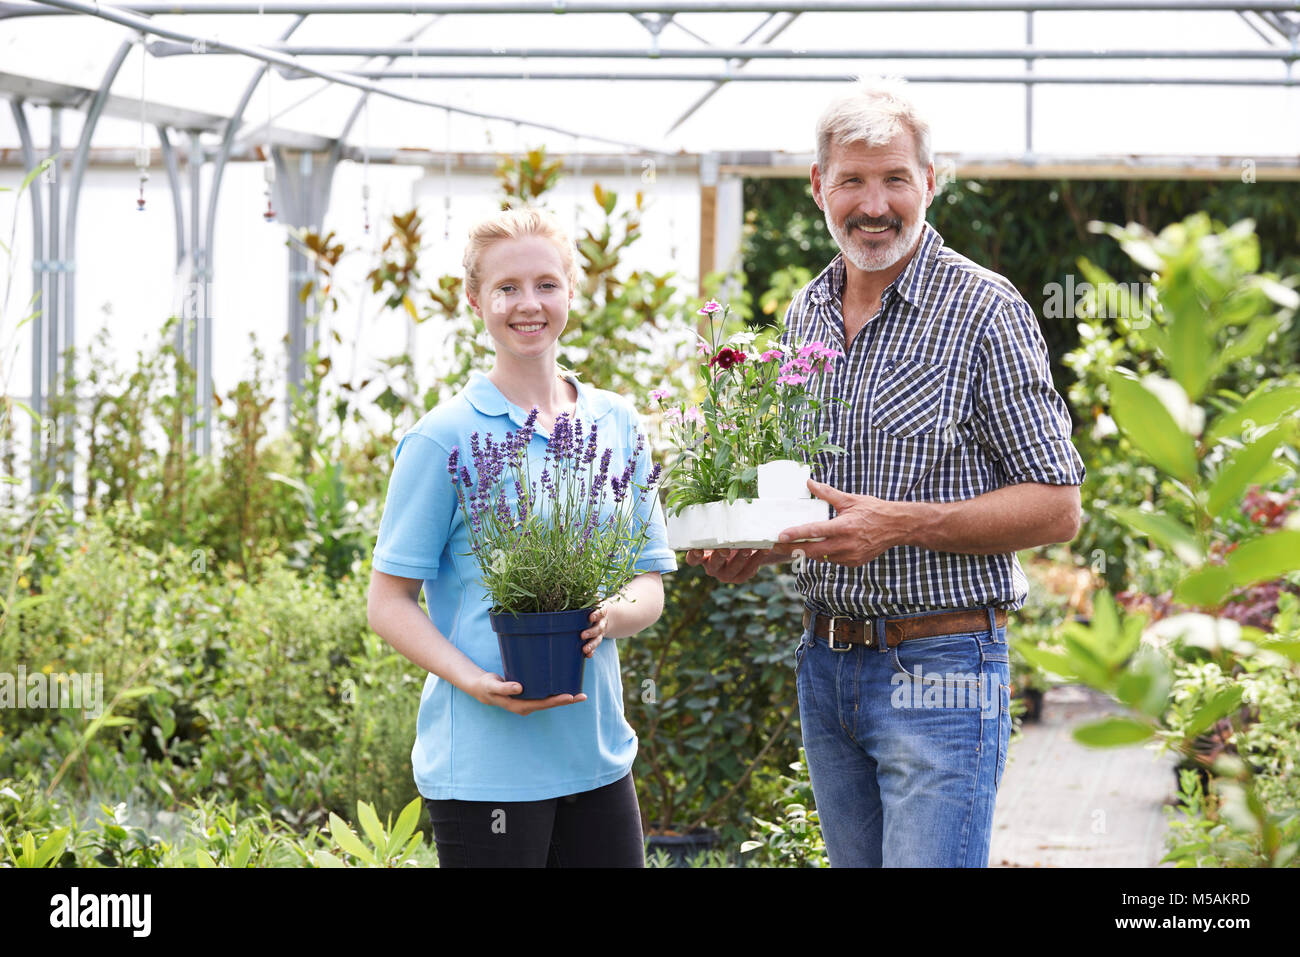 Portrait Of Male Customer With Sales Assistant At Garden Center Stock Photo